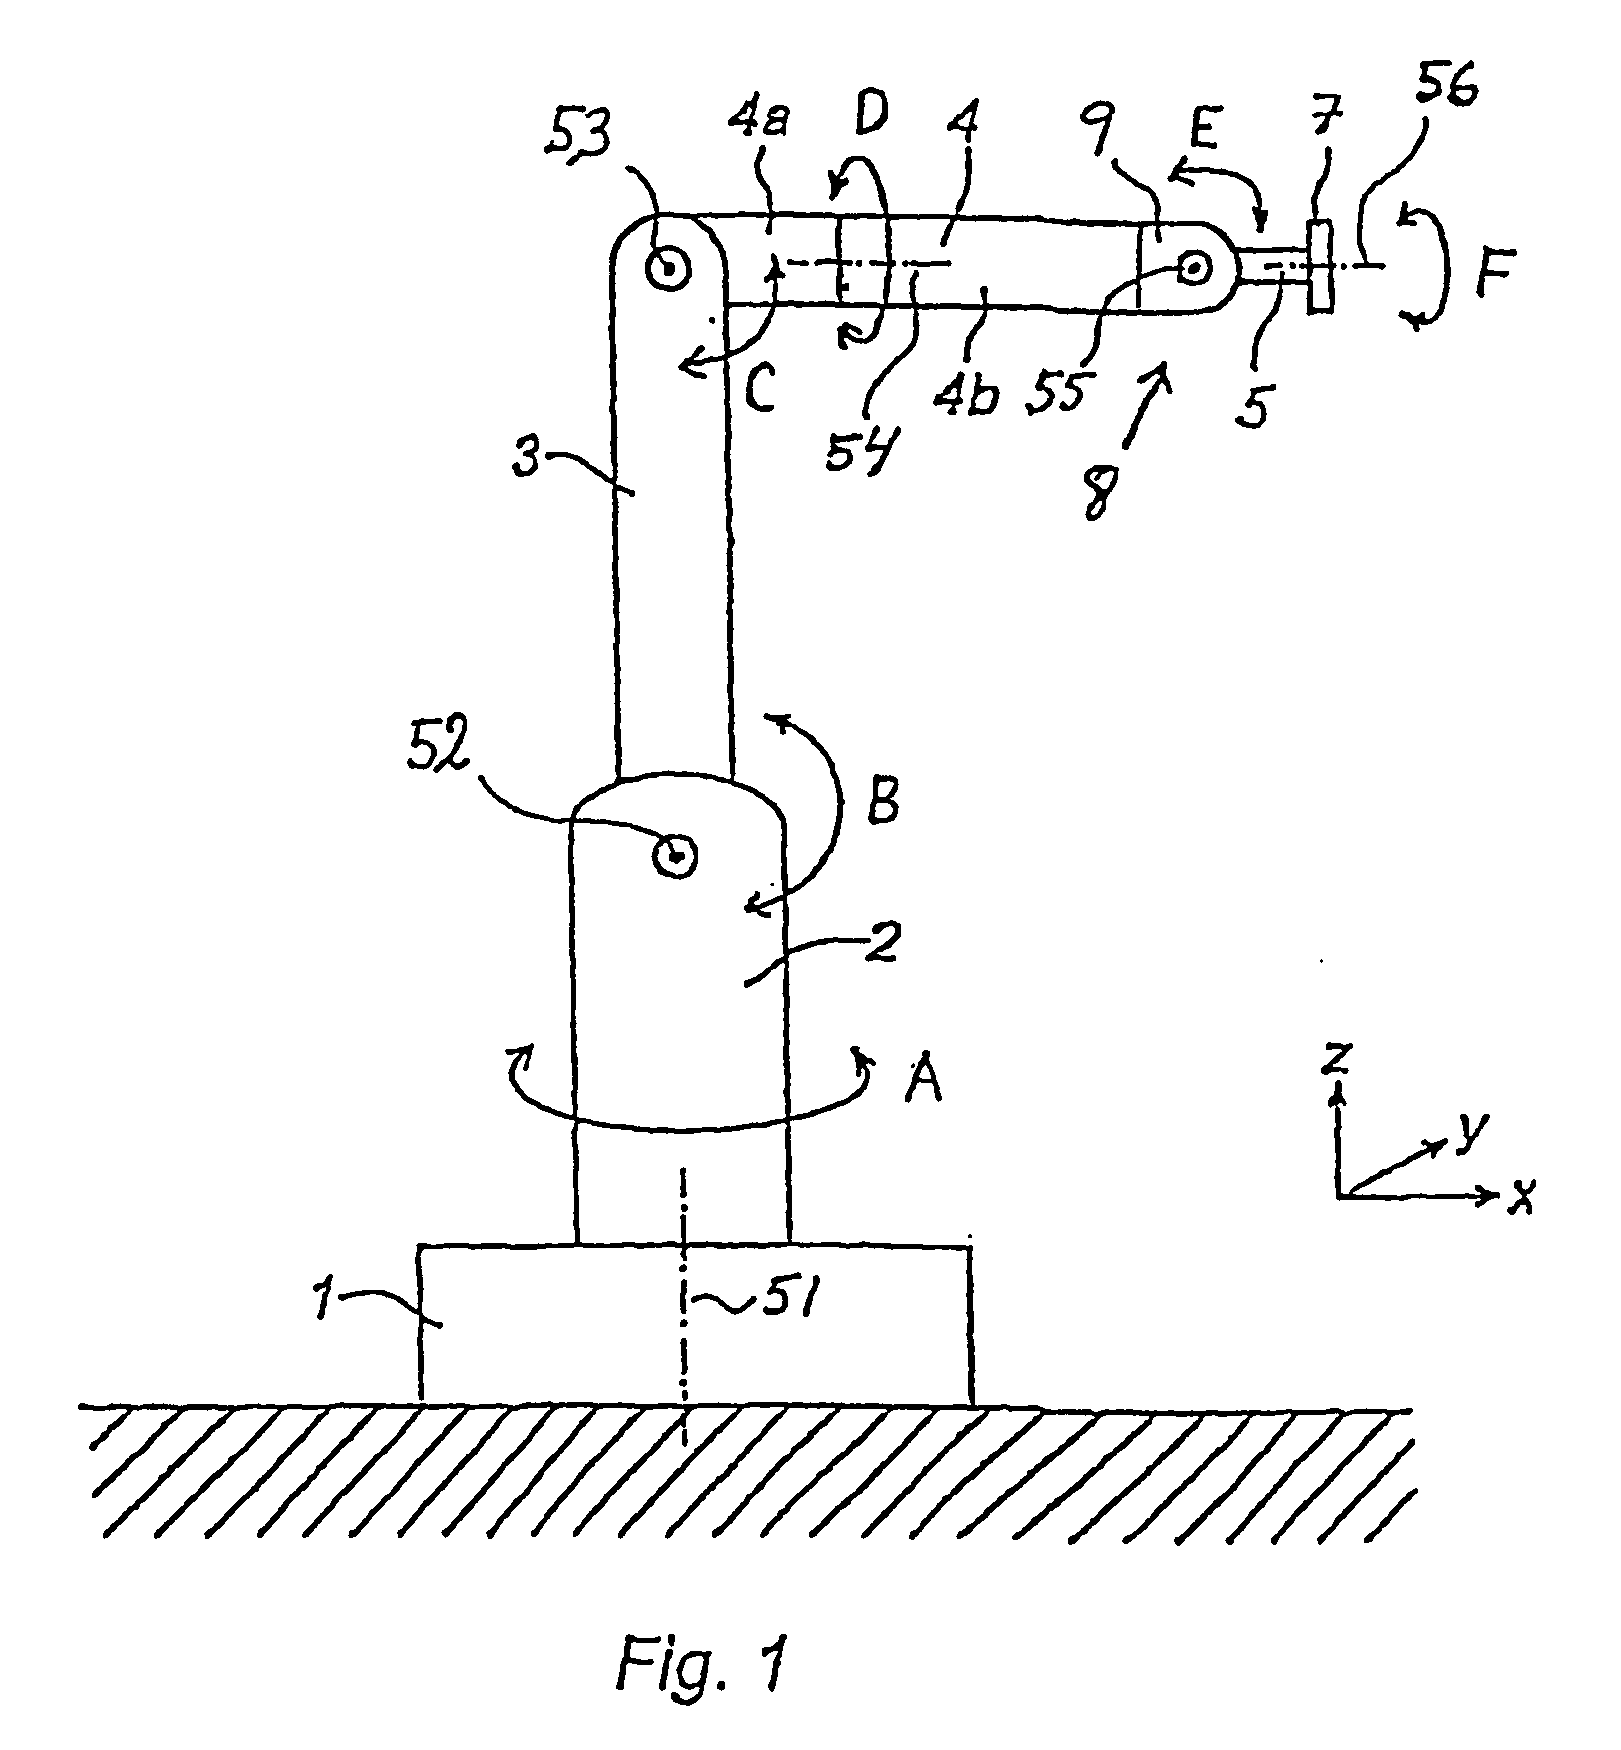 Robot wrist comprising a drive unit incorporated in a tilt